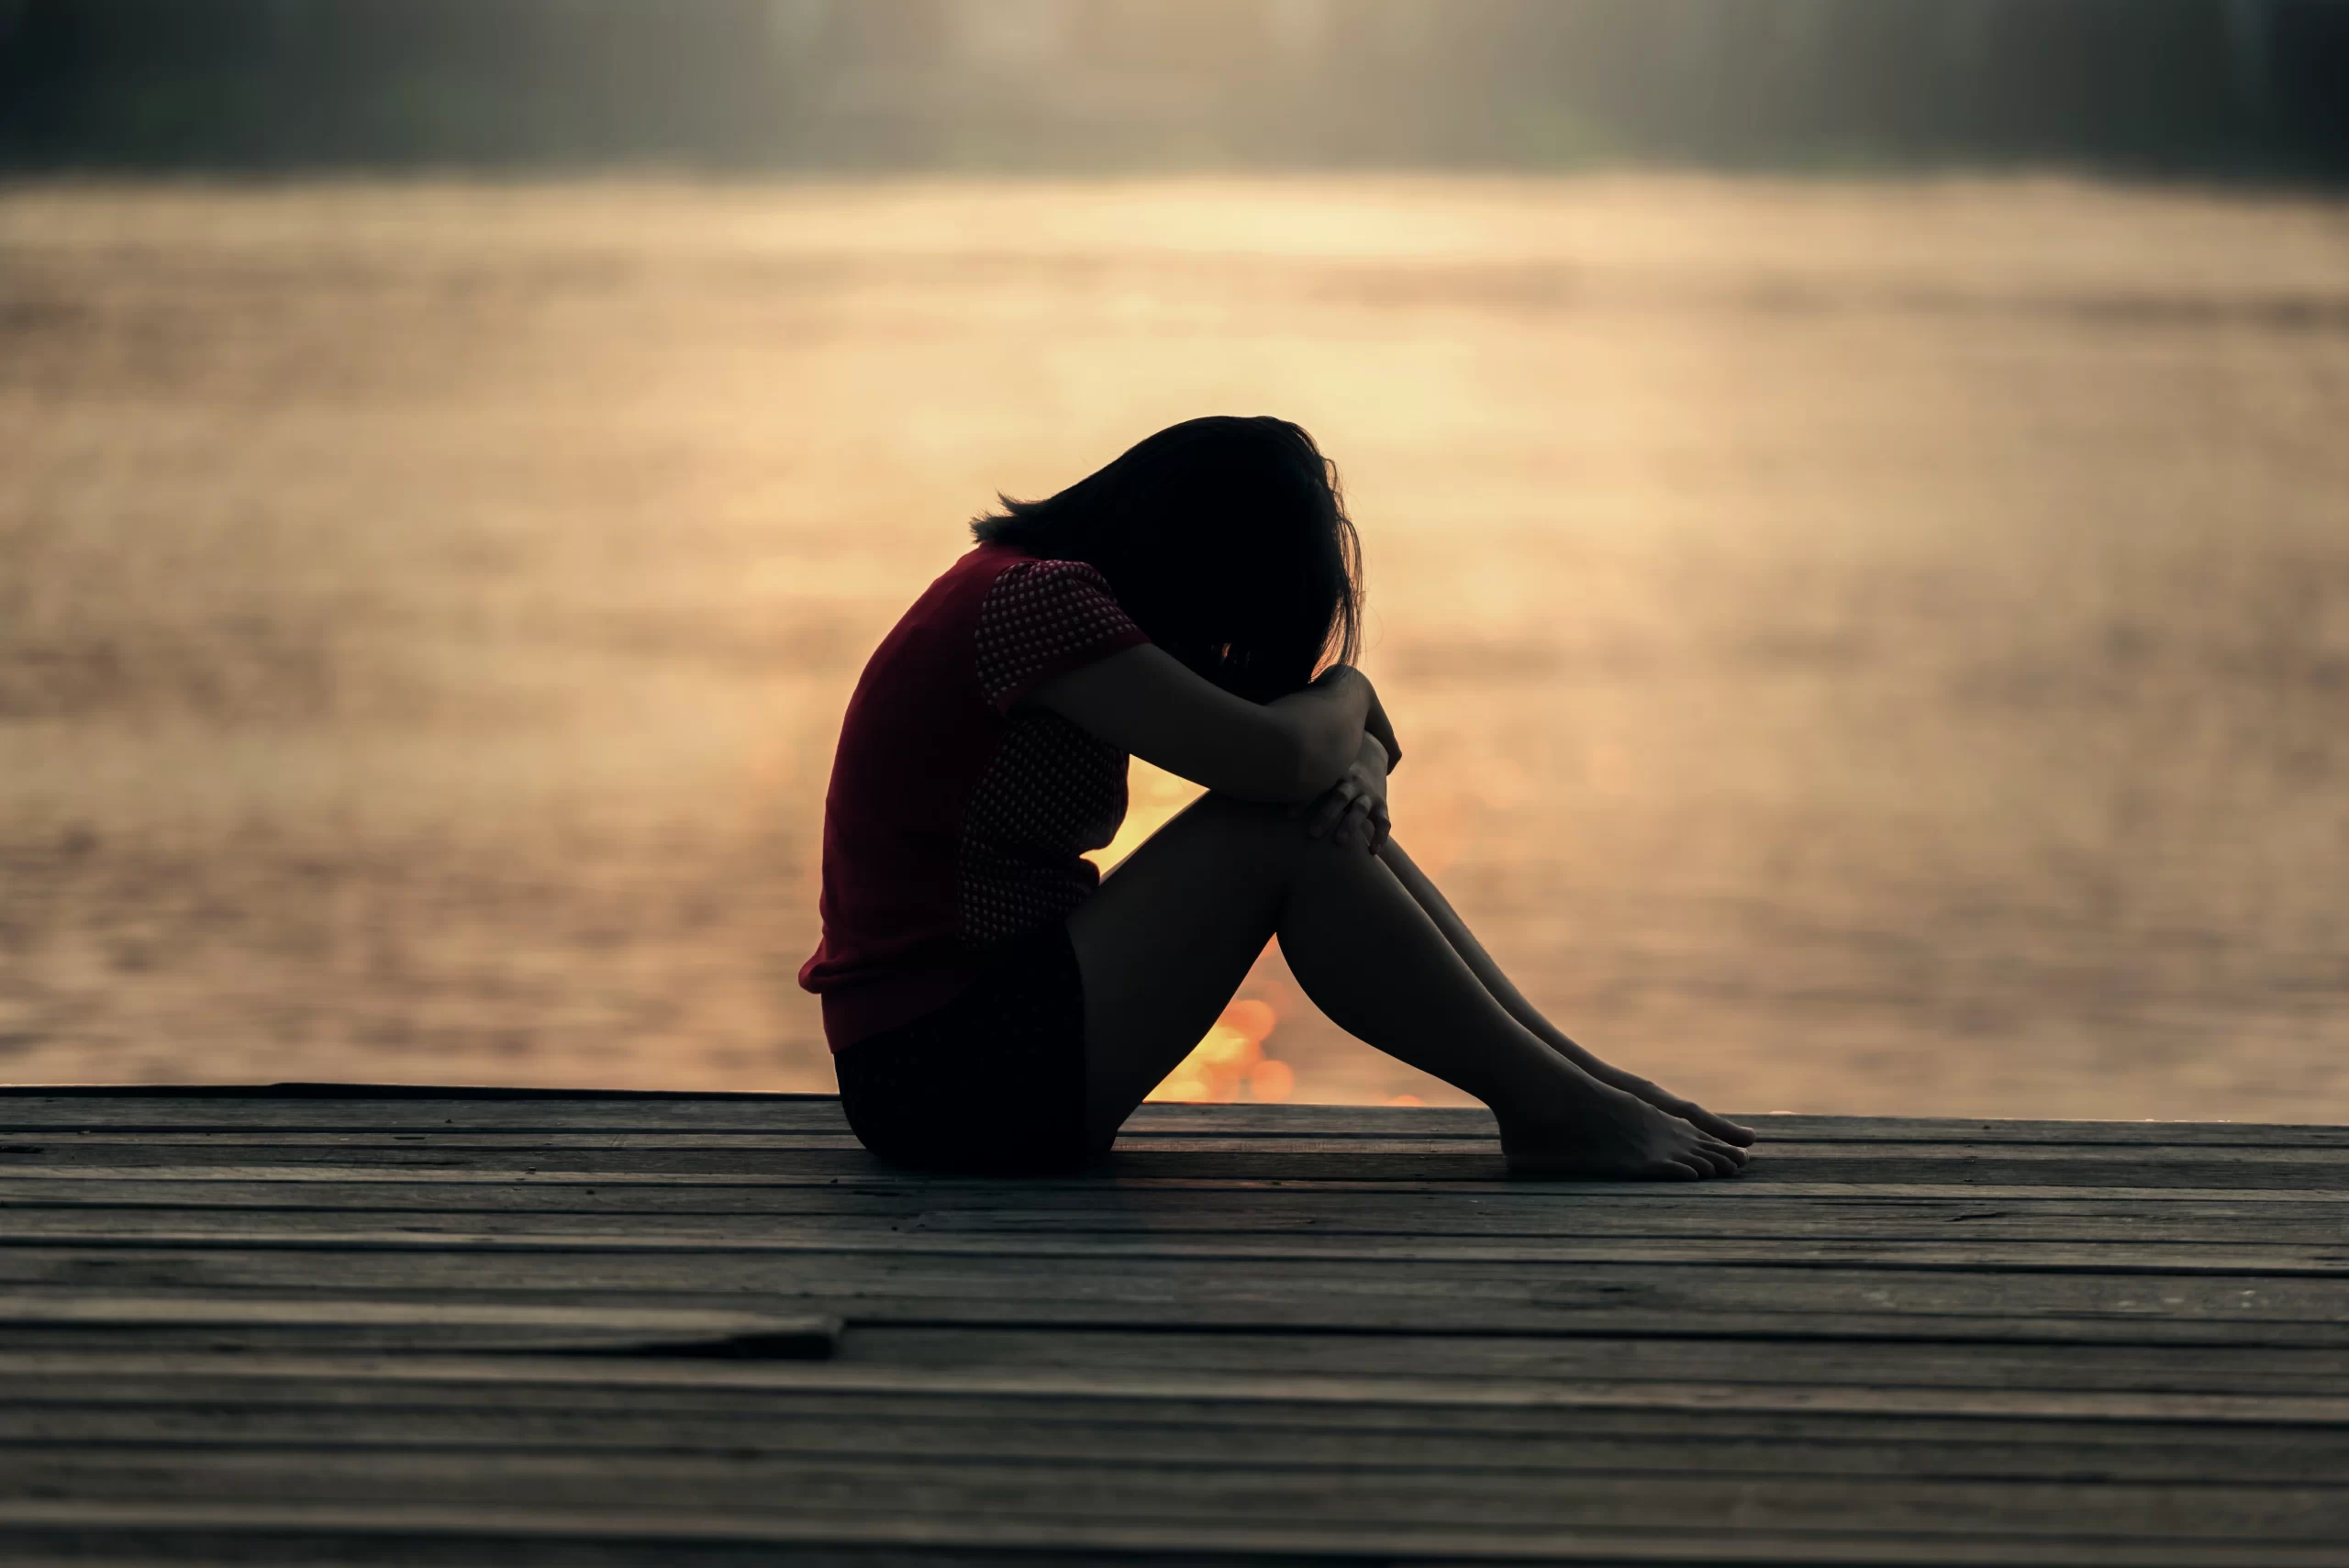 Sadness: Causes And Solutions